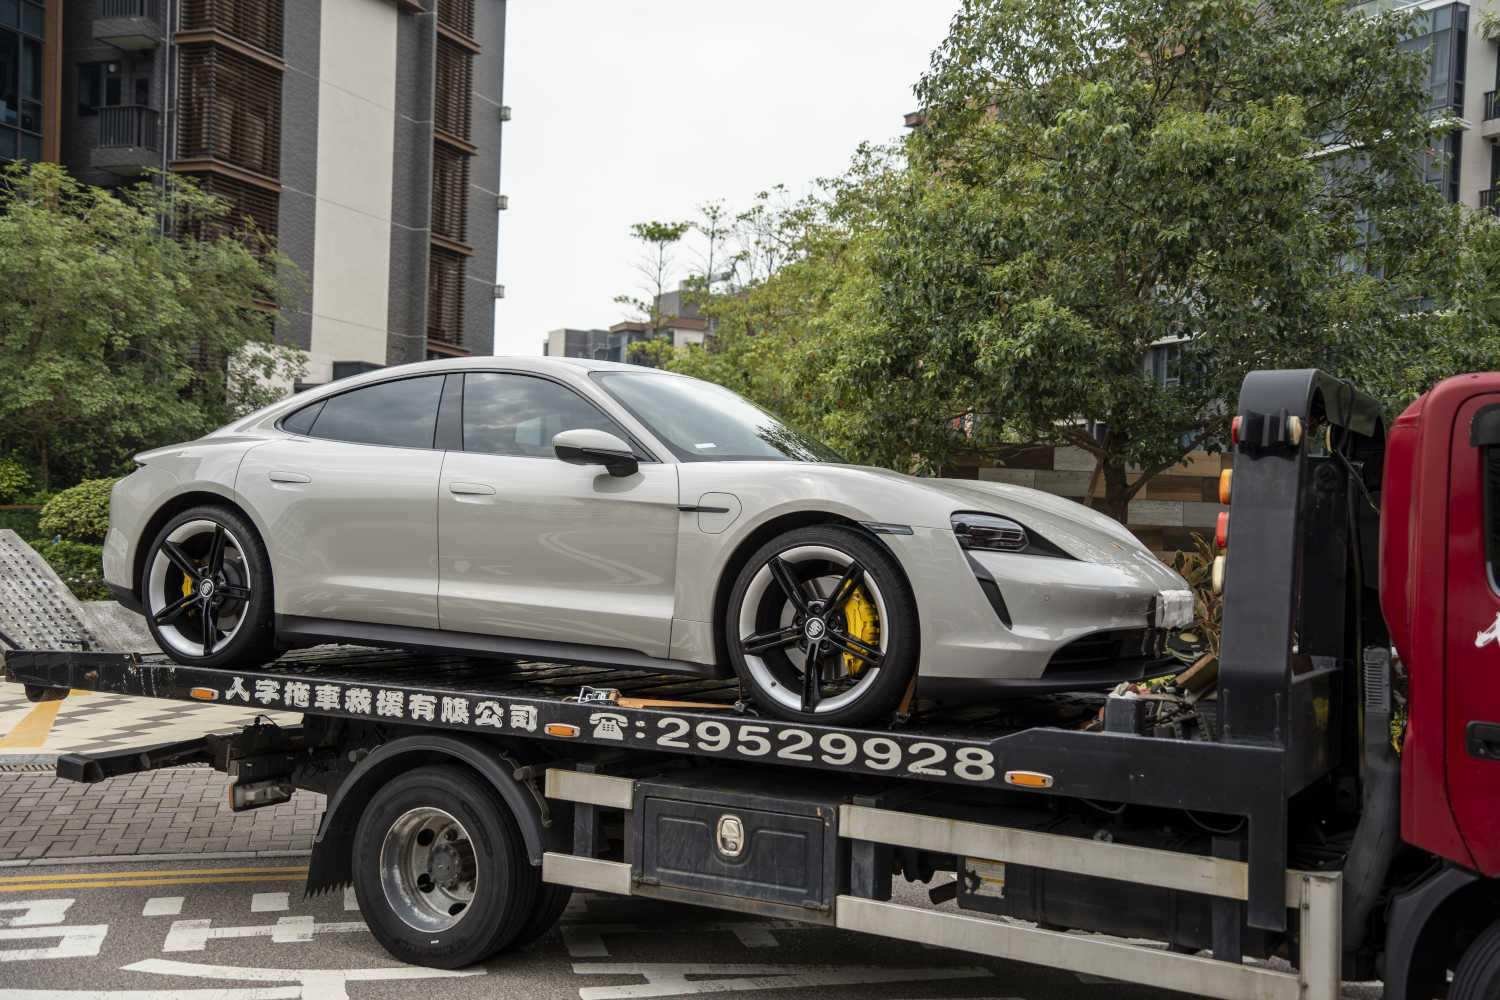 Towing an electric vehicle like this Porsche Taycan is possible